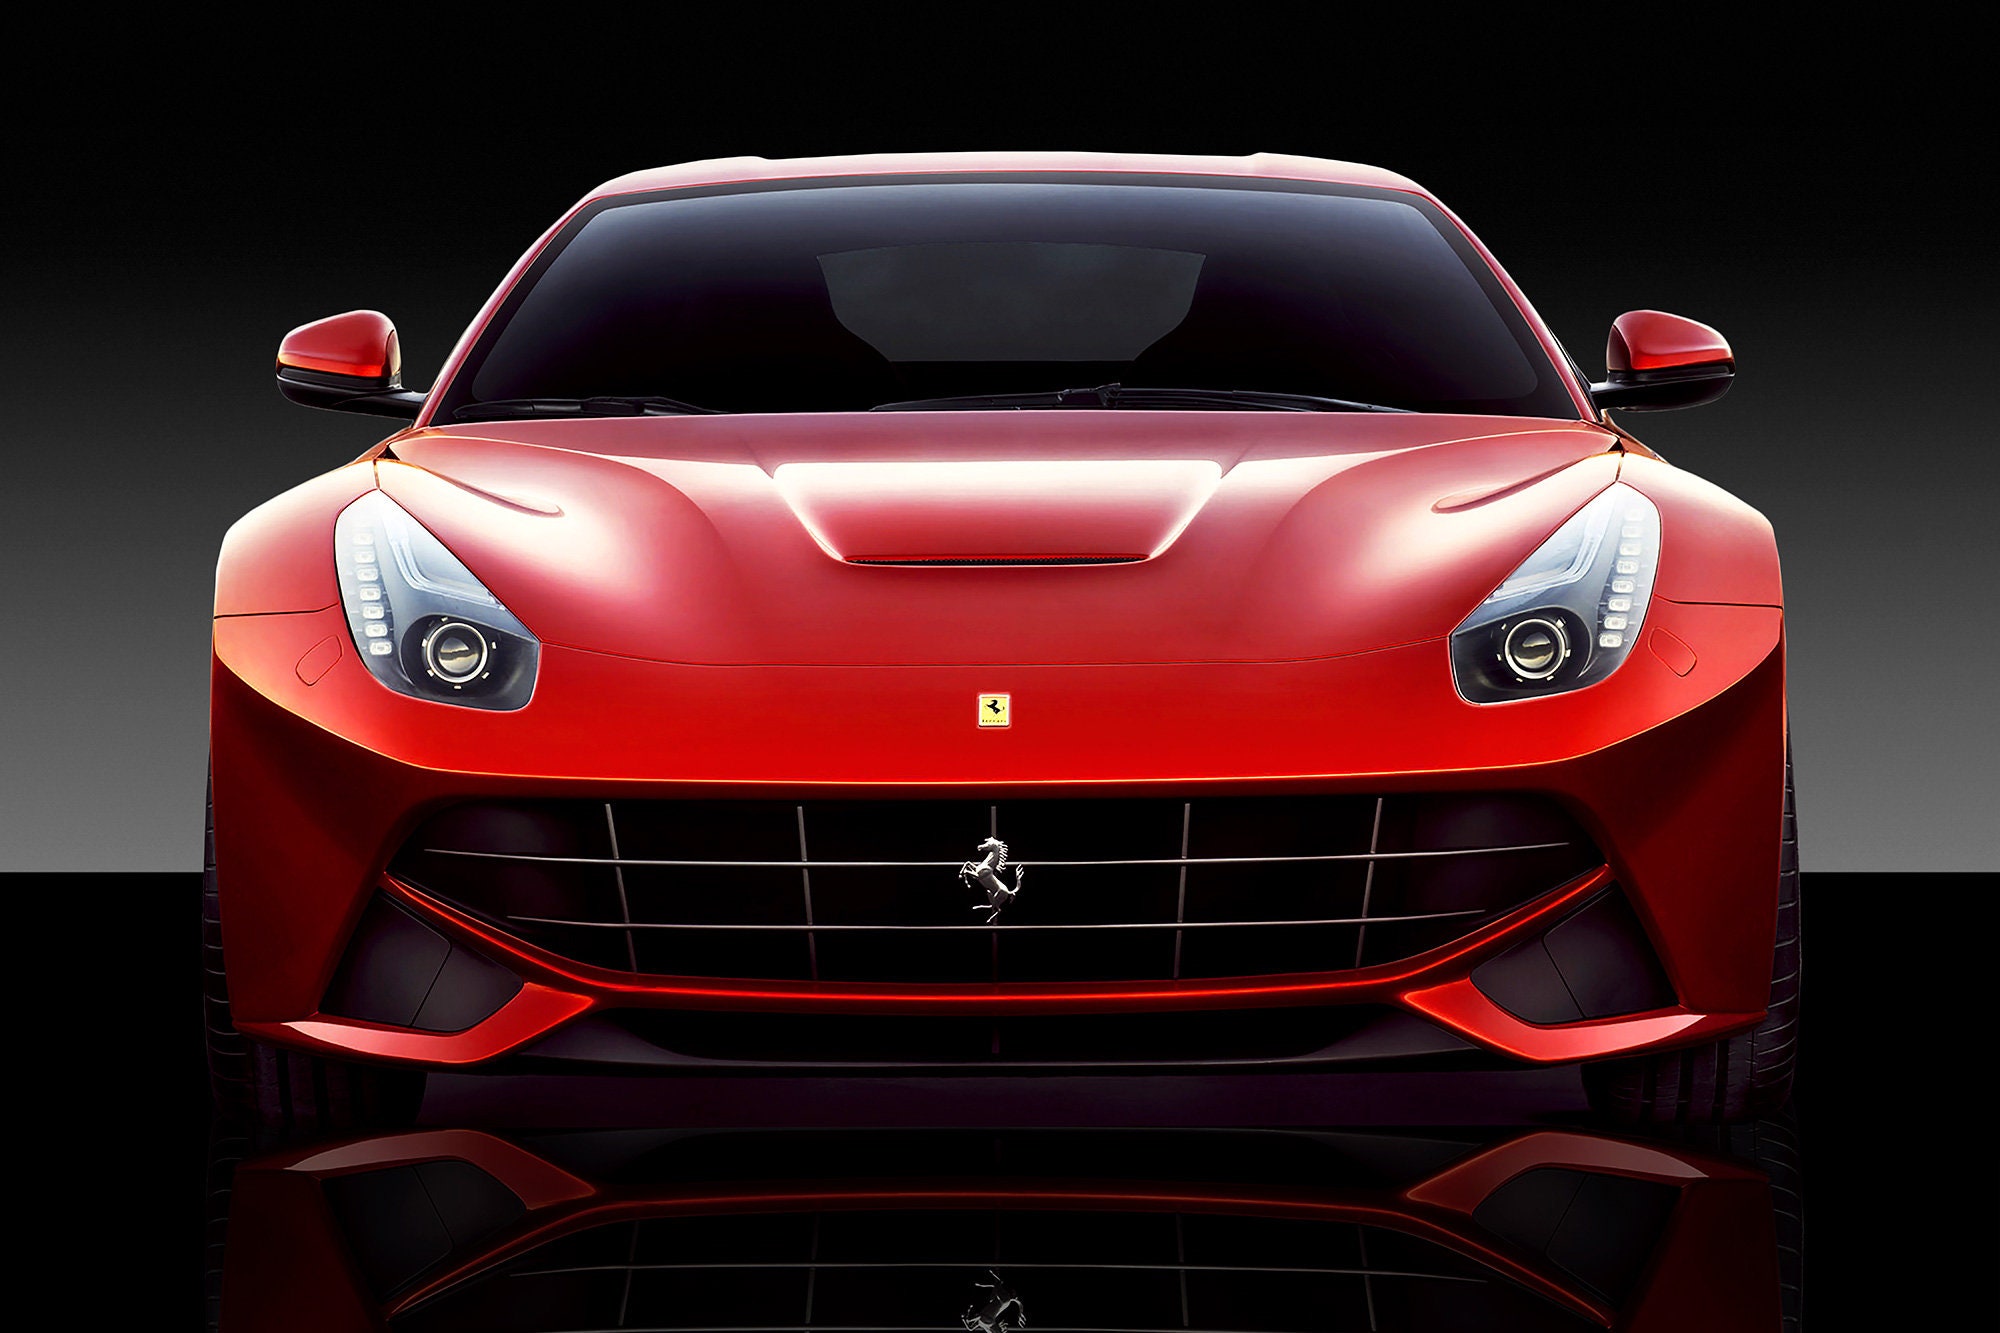 Xotiks Ferrari F12 Berlinetta - Fine Art Giclee Canvas Print Wall Art.  Professional gallery wrap style and ready to hang Photo on Canvas Gallery  Wrap